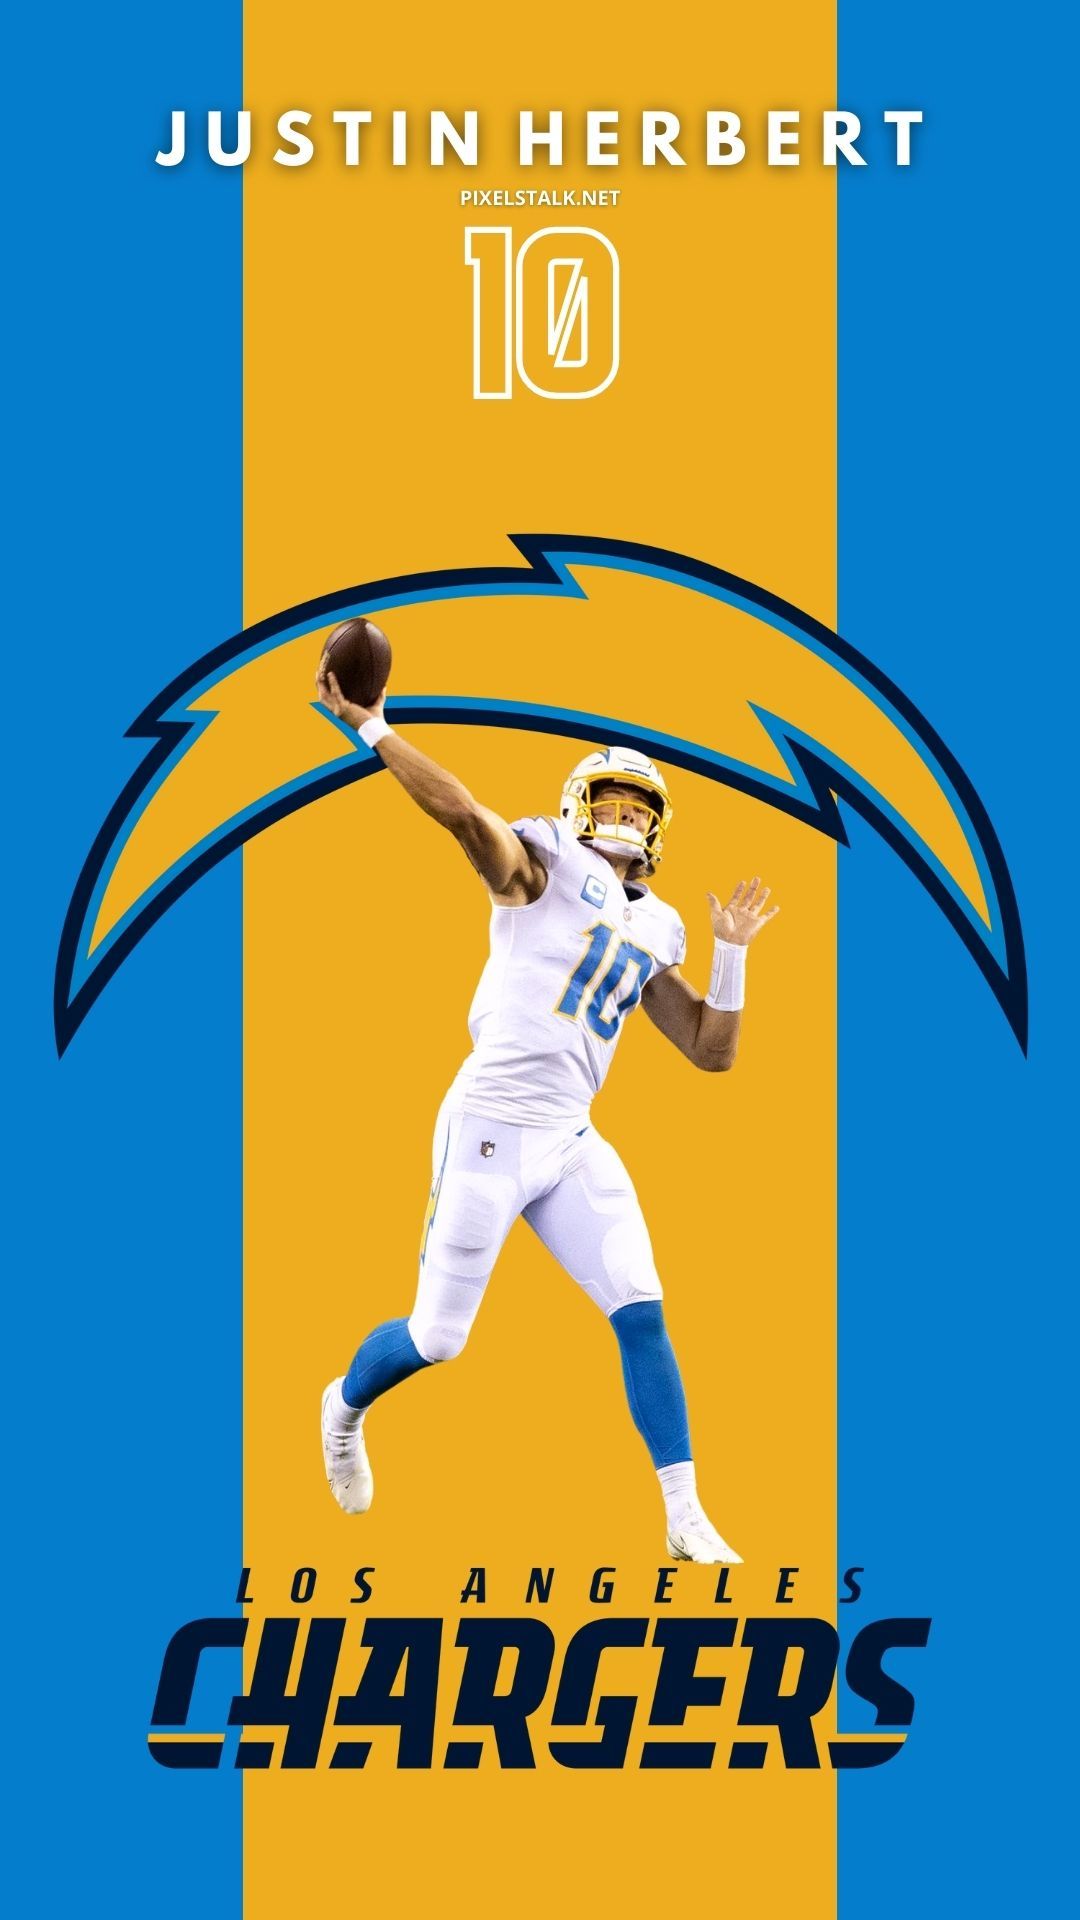 Los Angeles Chargers Logo Images